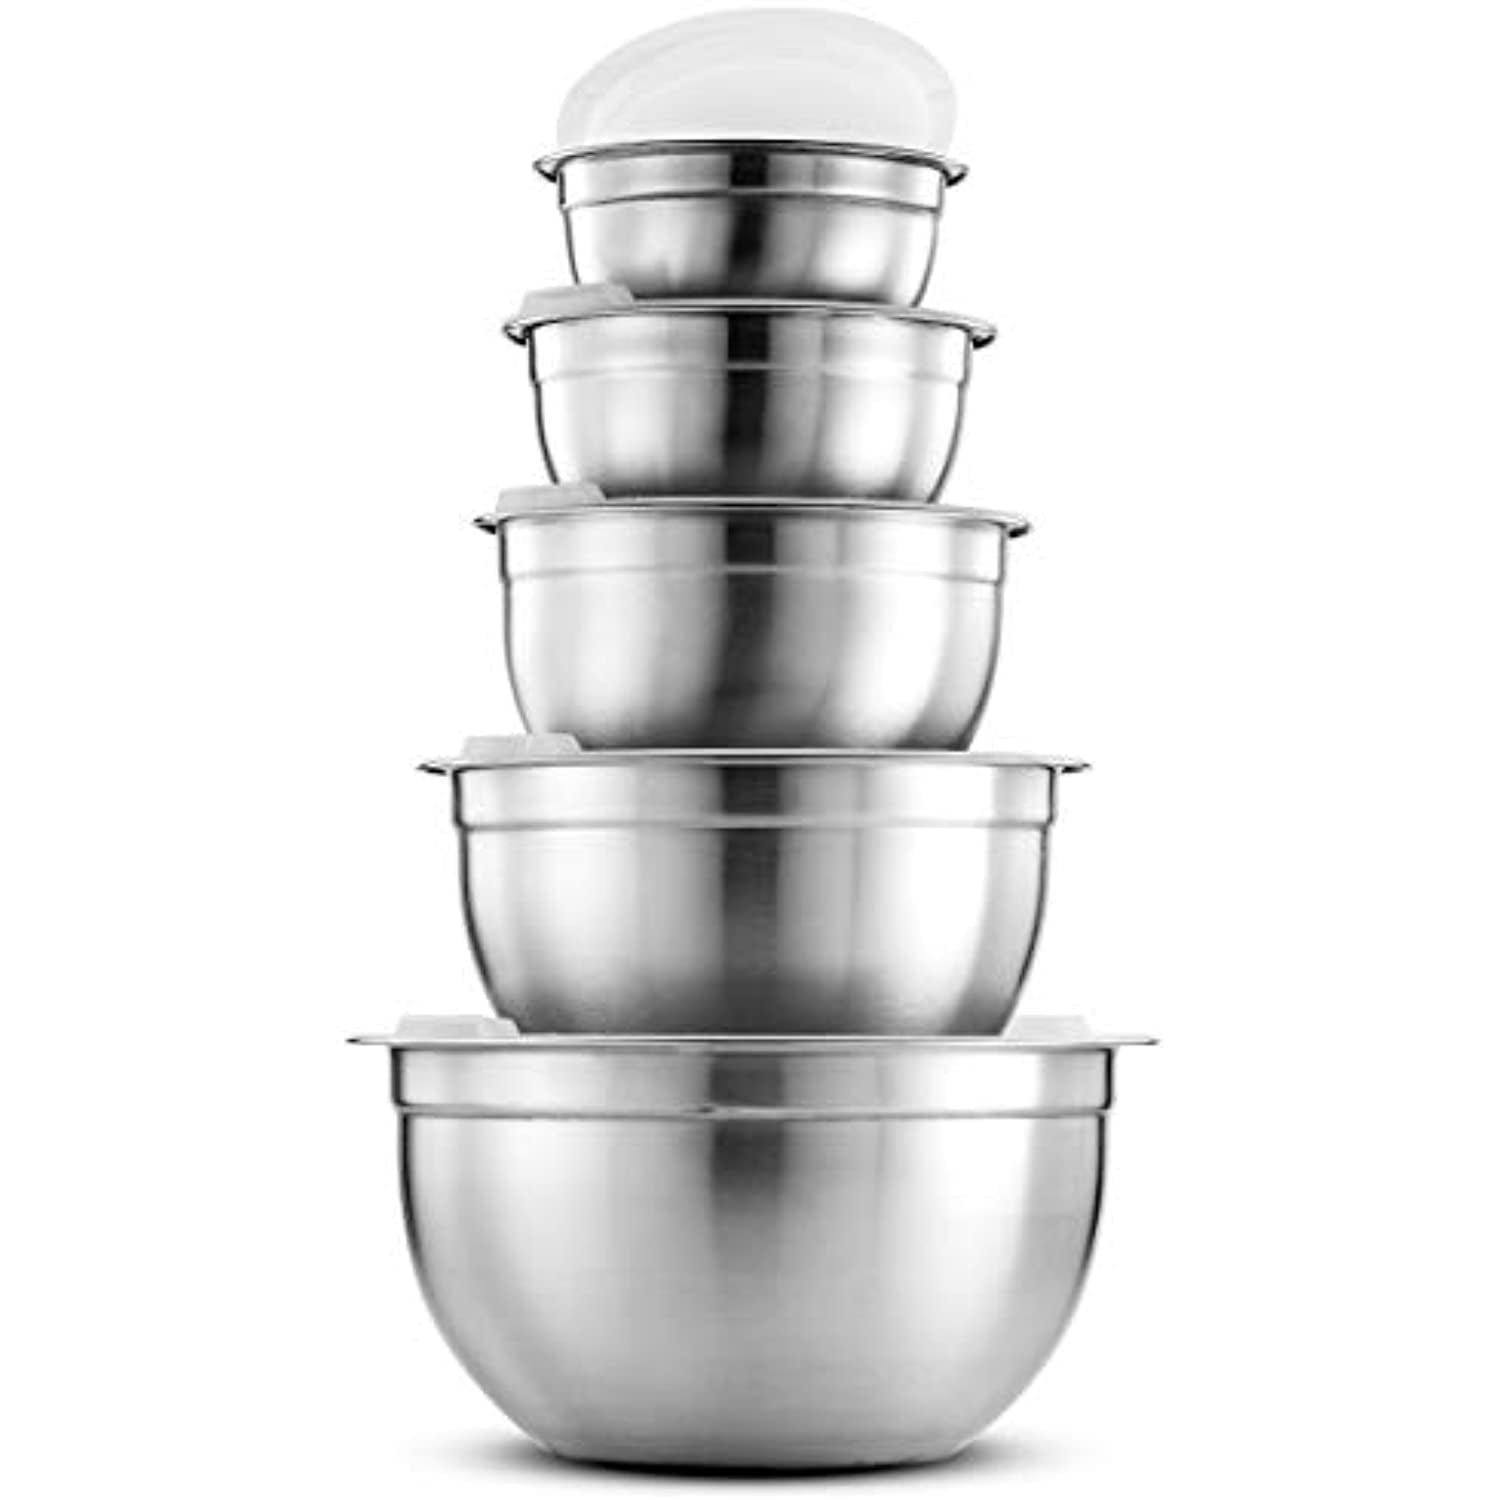 Stainless Steel Mixing Bowl Set of 5, from 4 to 12 , Non Slip Nesting  Storage Bowls, 5pc - Kroger